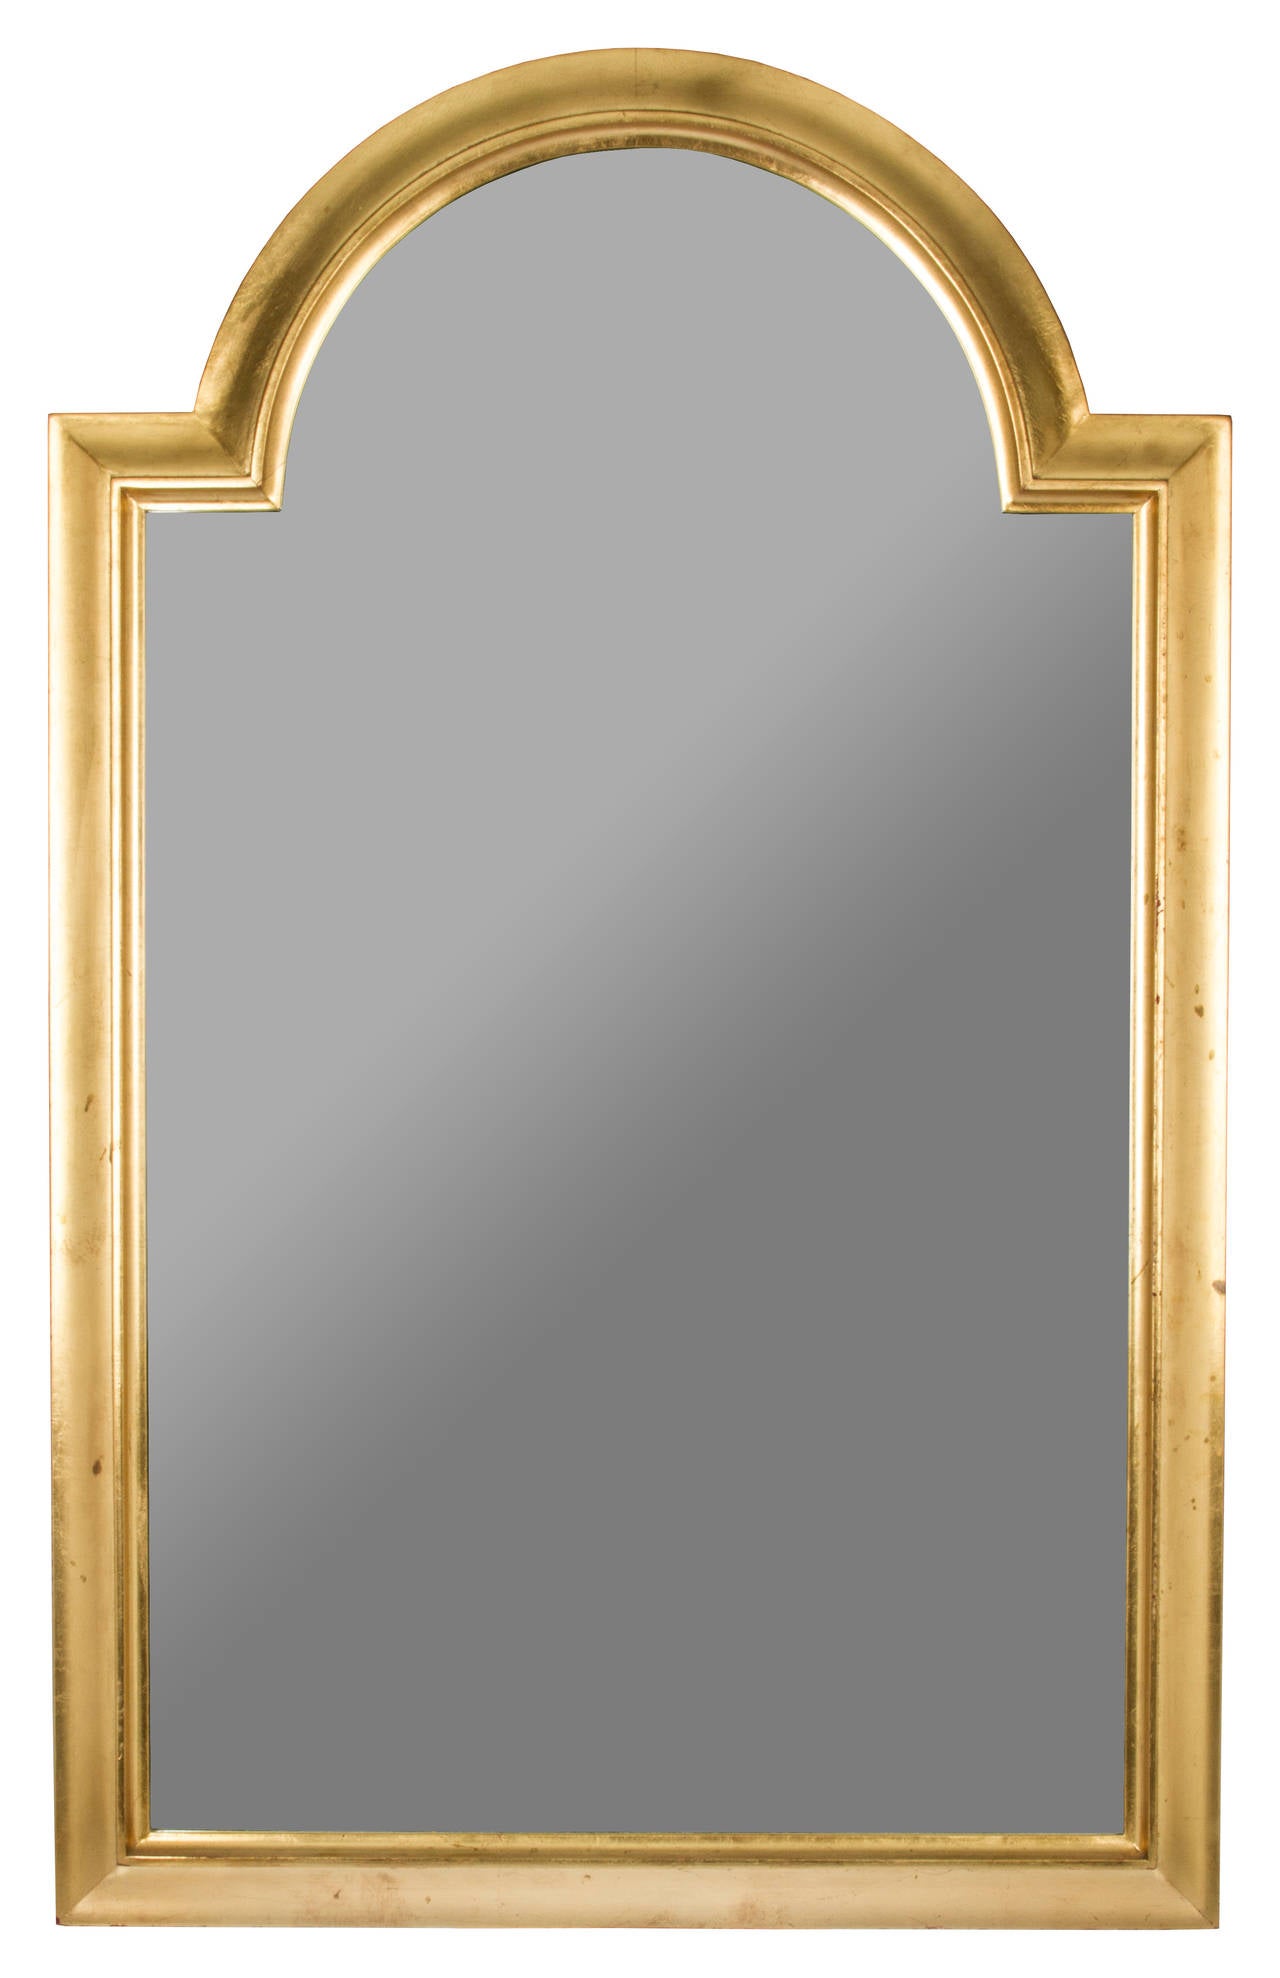 These are a handsome pair of mirrors.  Their clean design makes them very versatile.  Sturdy, they are backed in masonite.